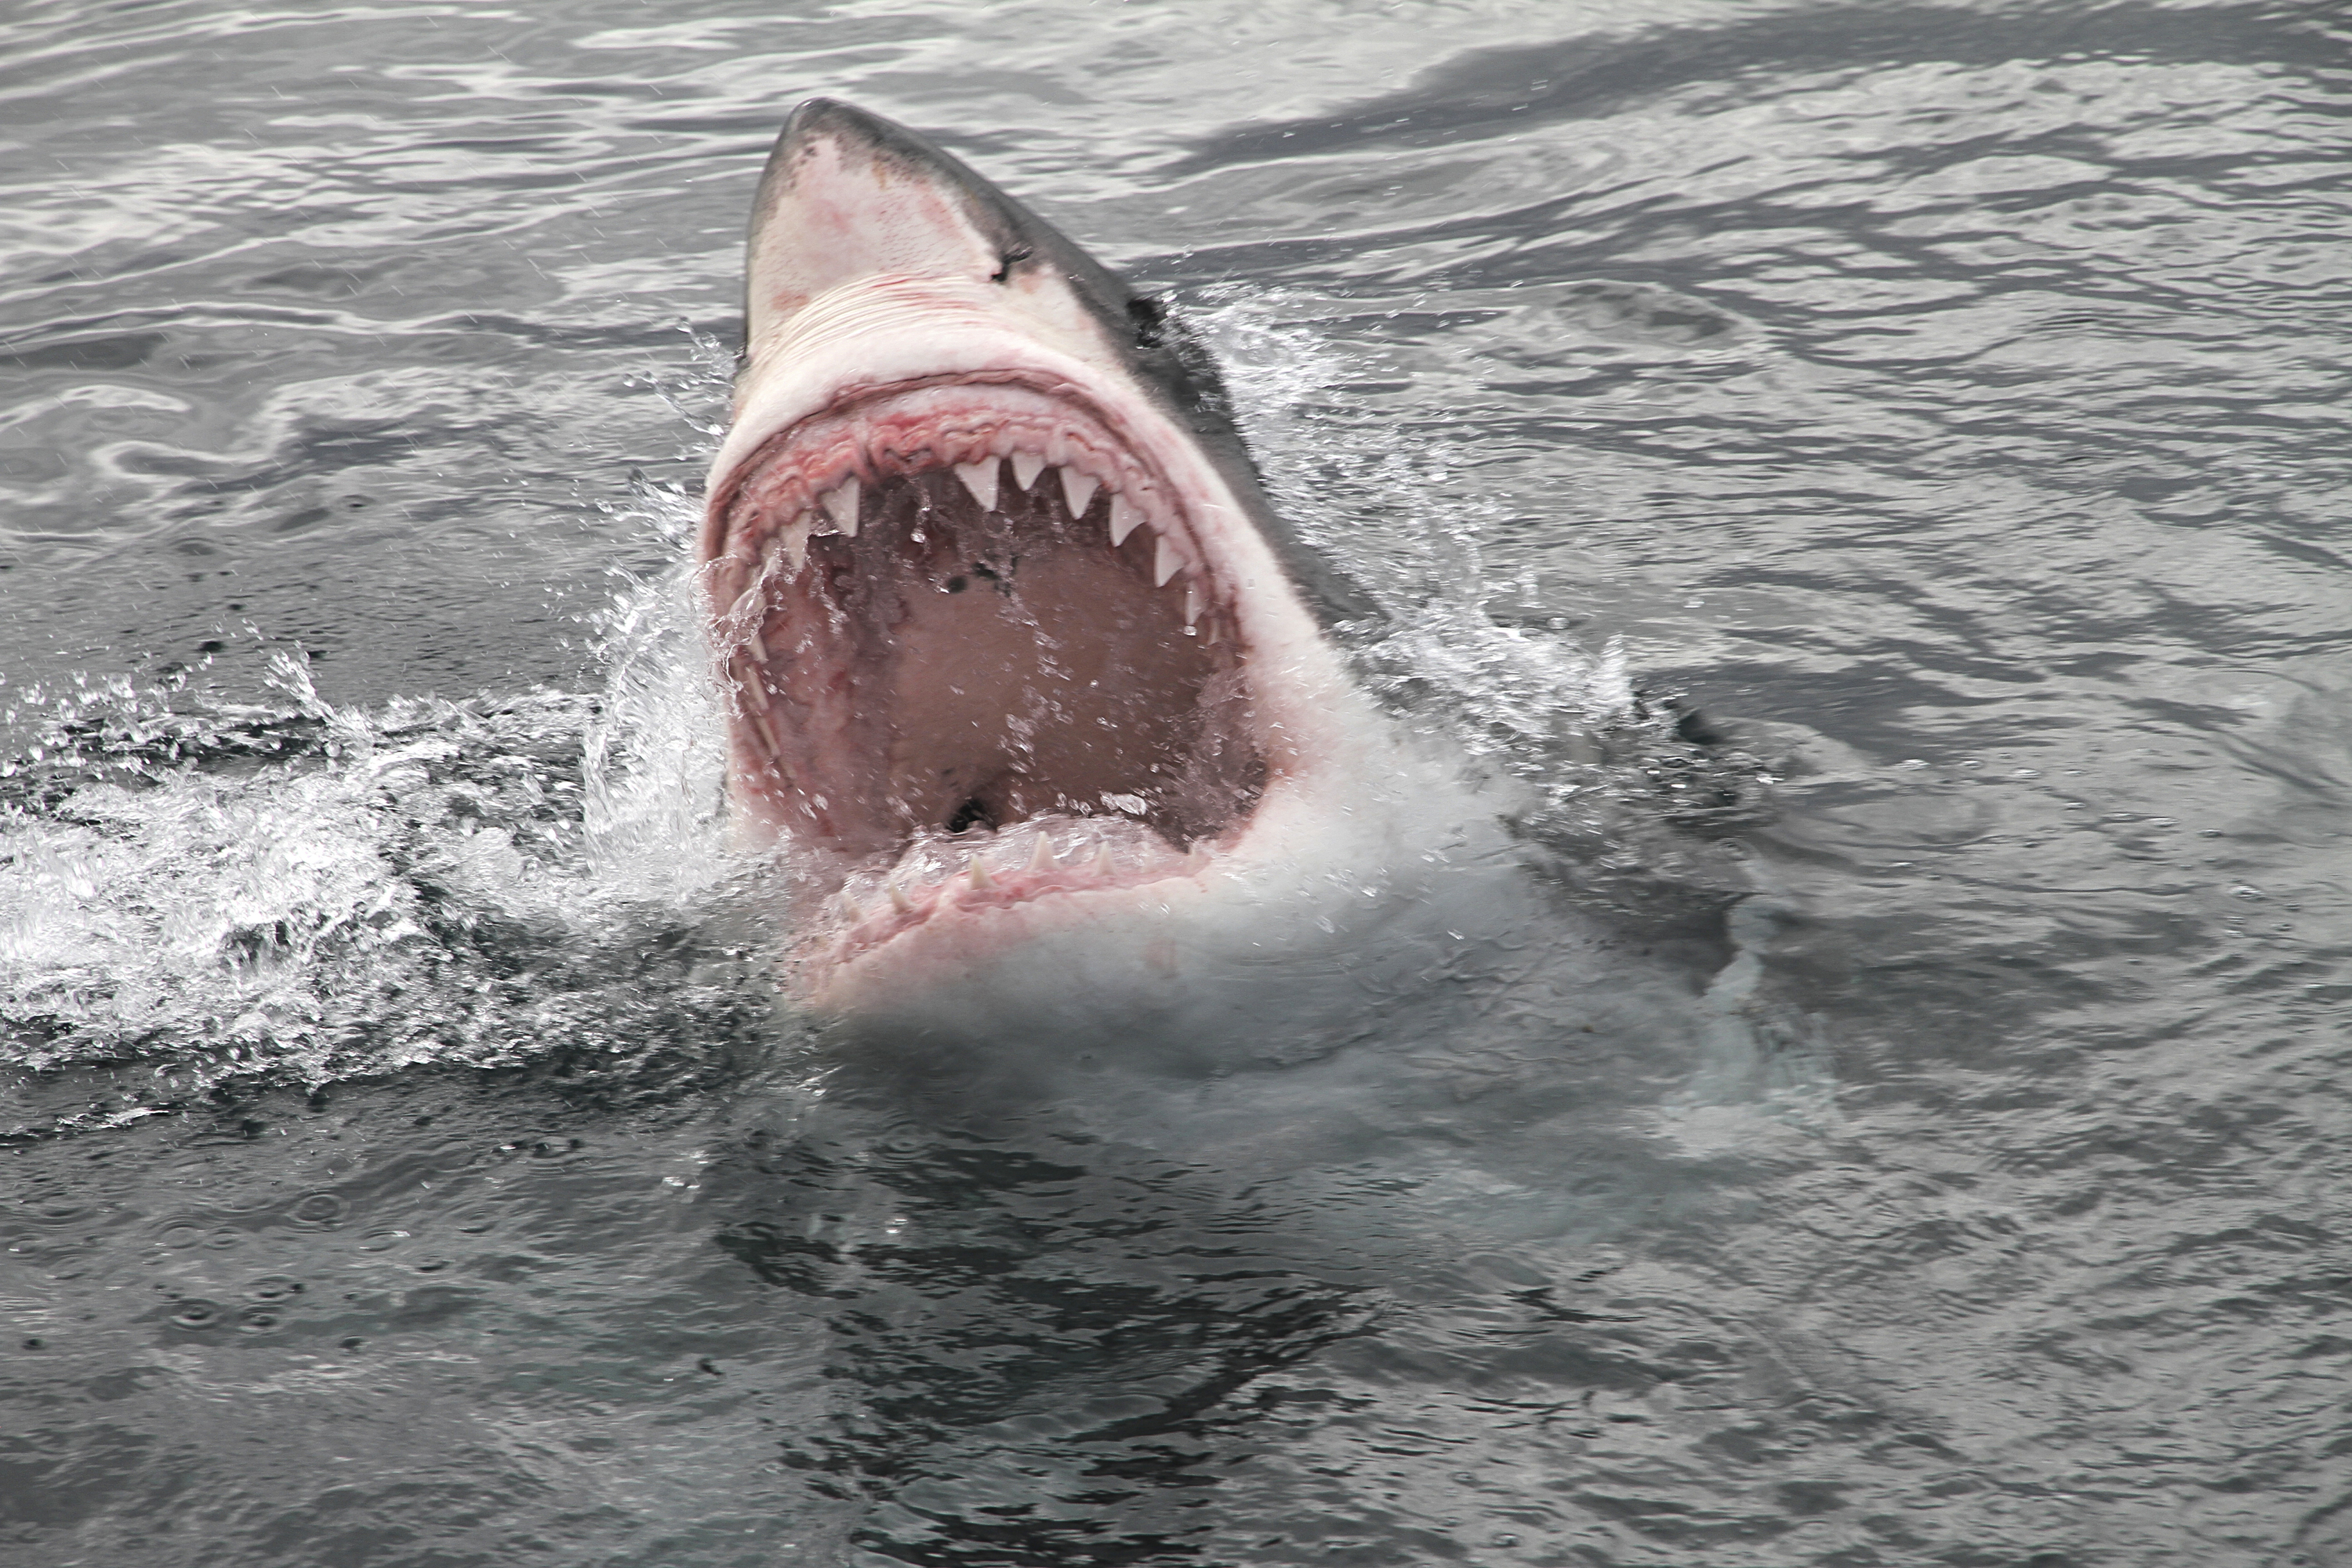 Cape Cod beaches close to swimming after several shark sightings: 'Lots of  activity today